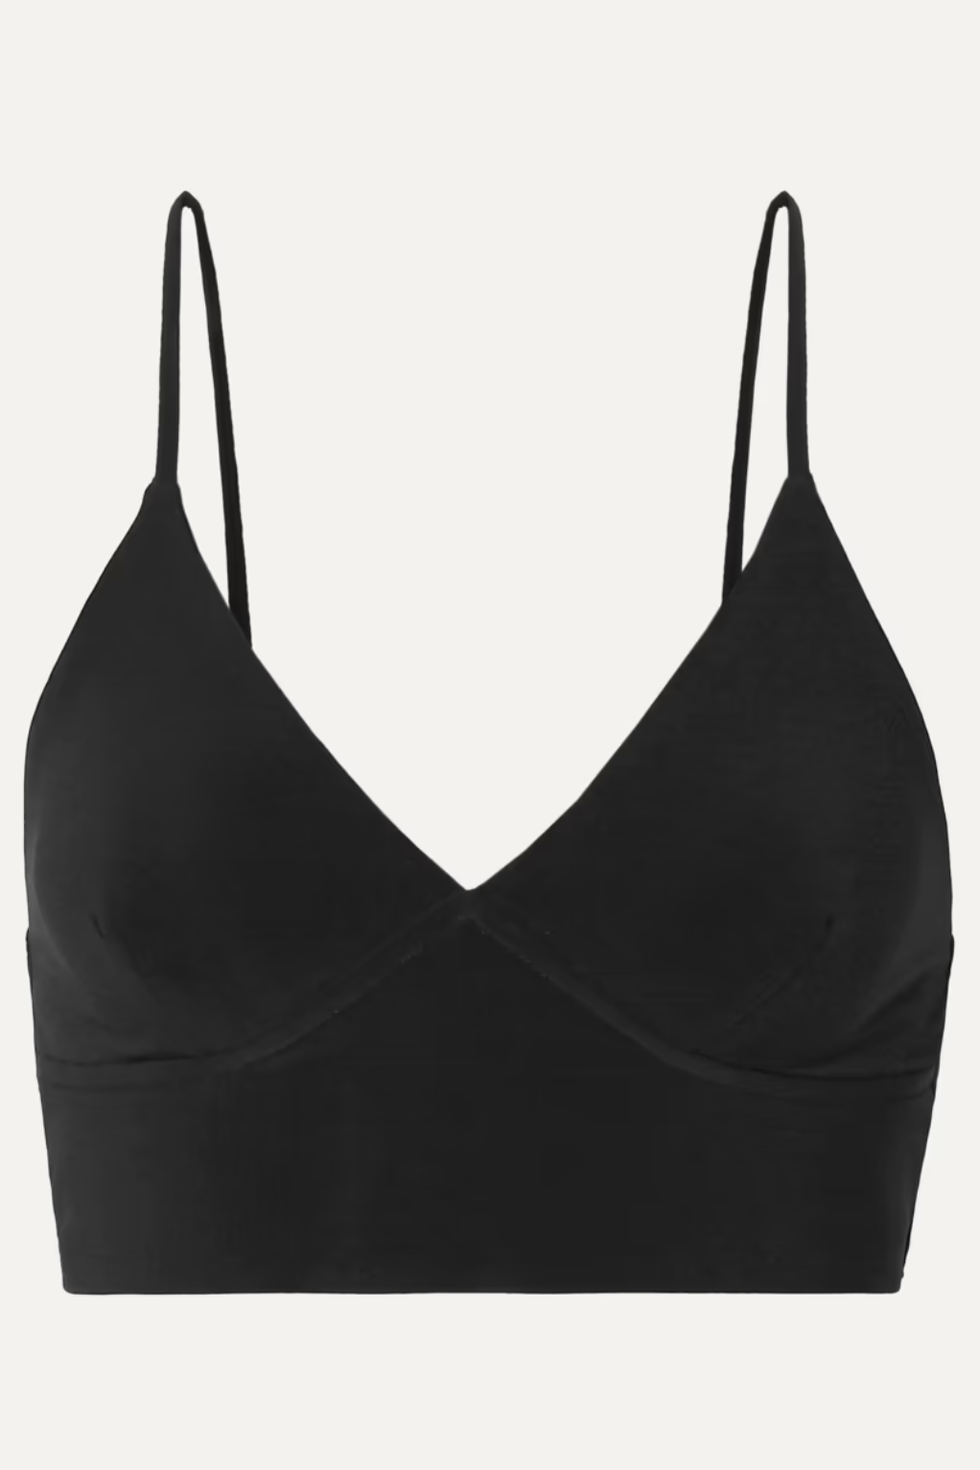 Best comfy bras 2024: 15 comfortable bras to buy and wear 24/7